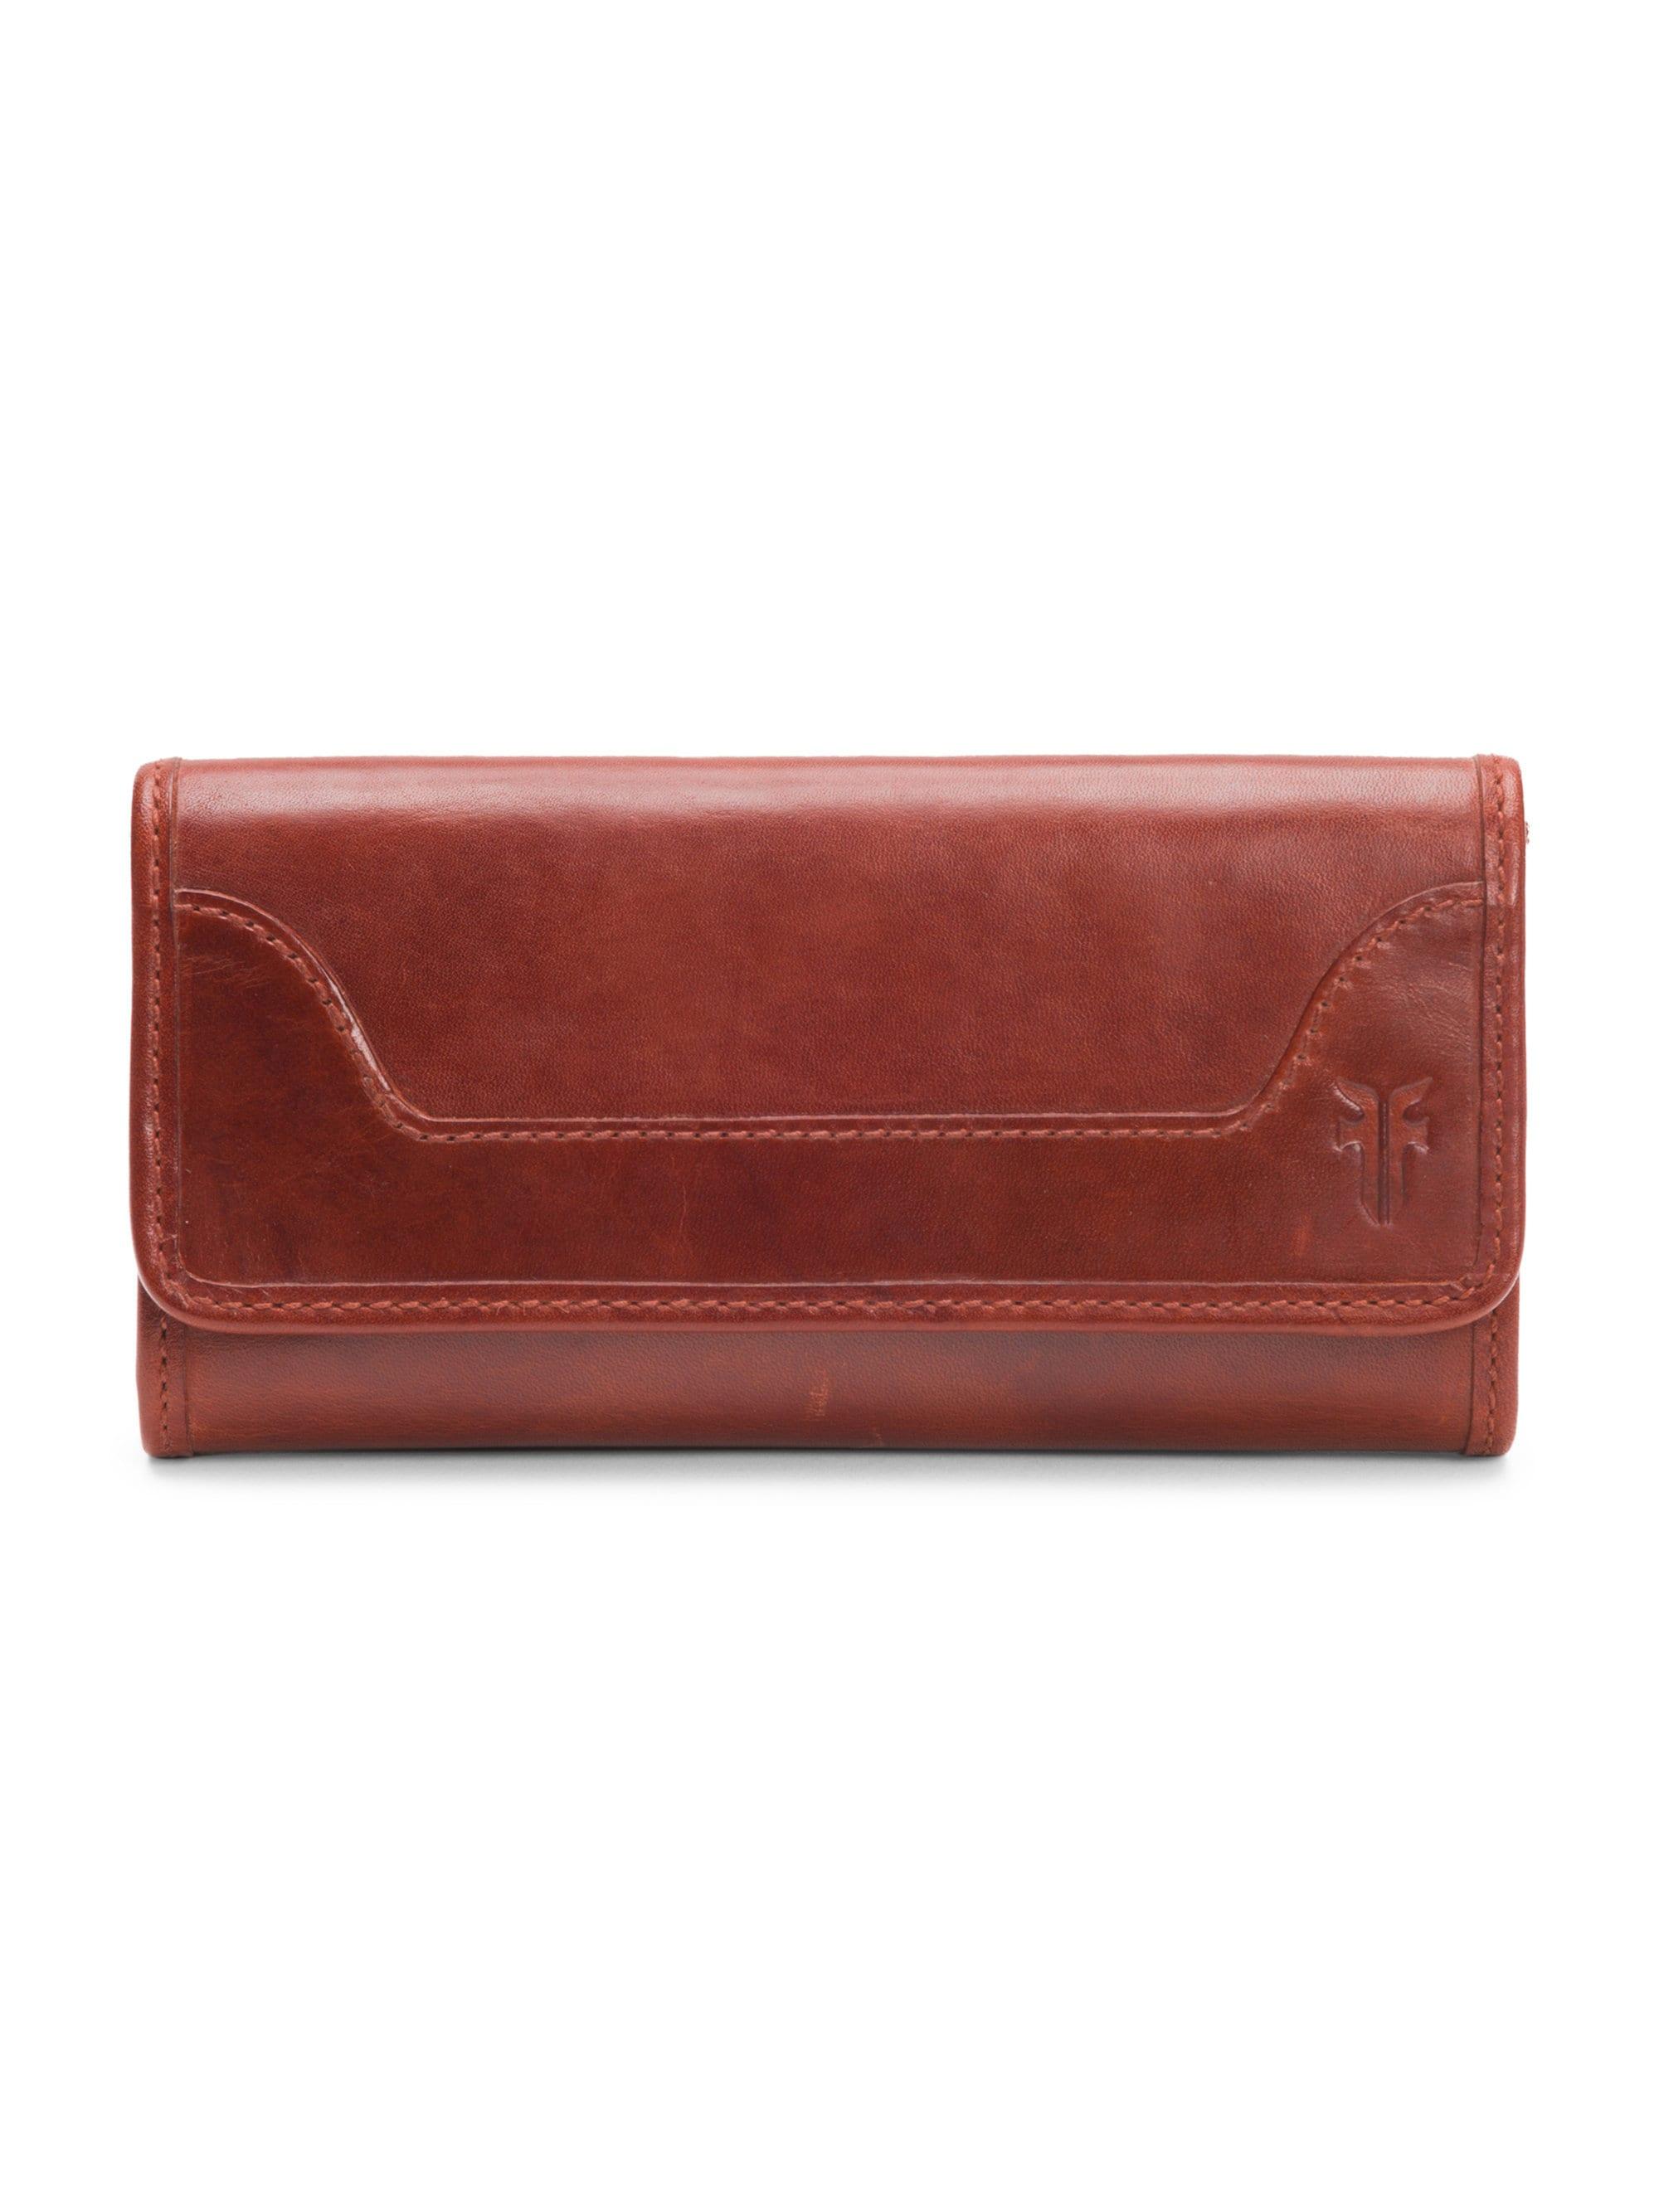 Frye Women&#39;s Melissa Leather Wallet - Cognac in Red Clay (Red) - Lyst